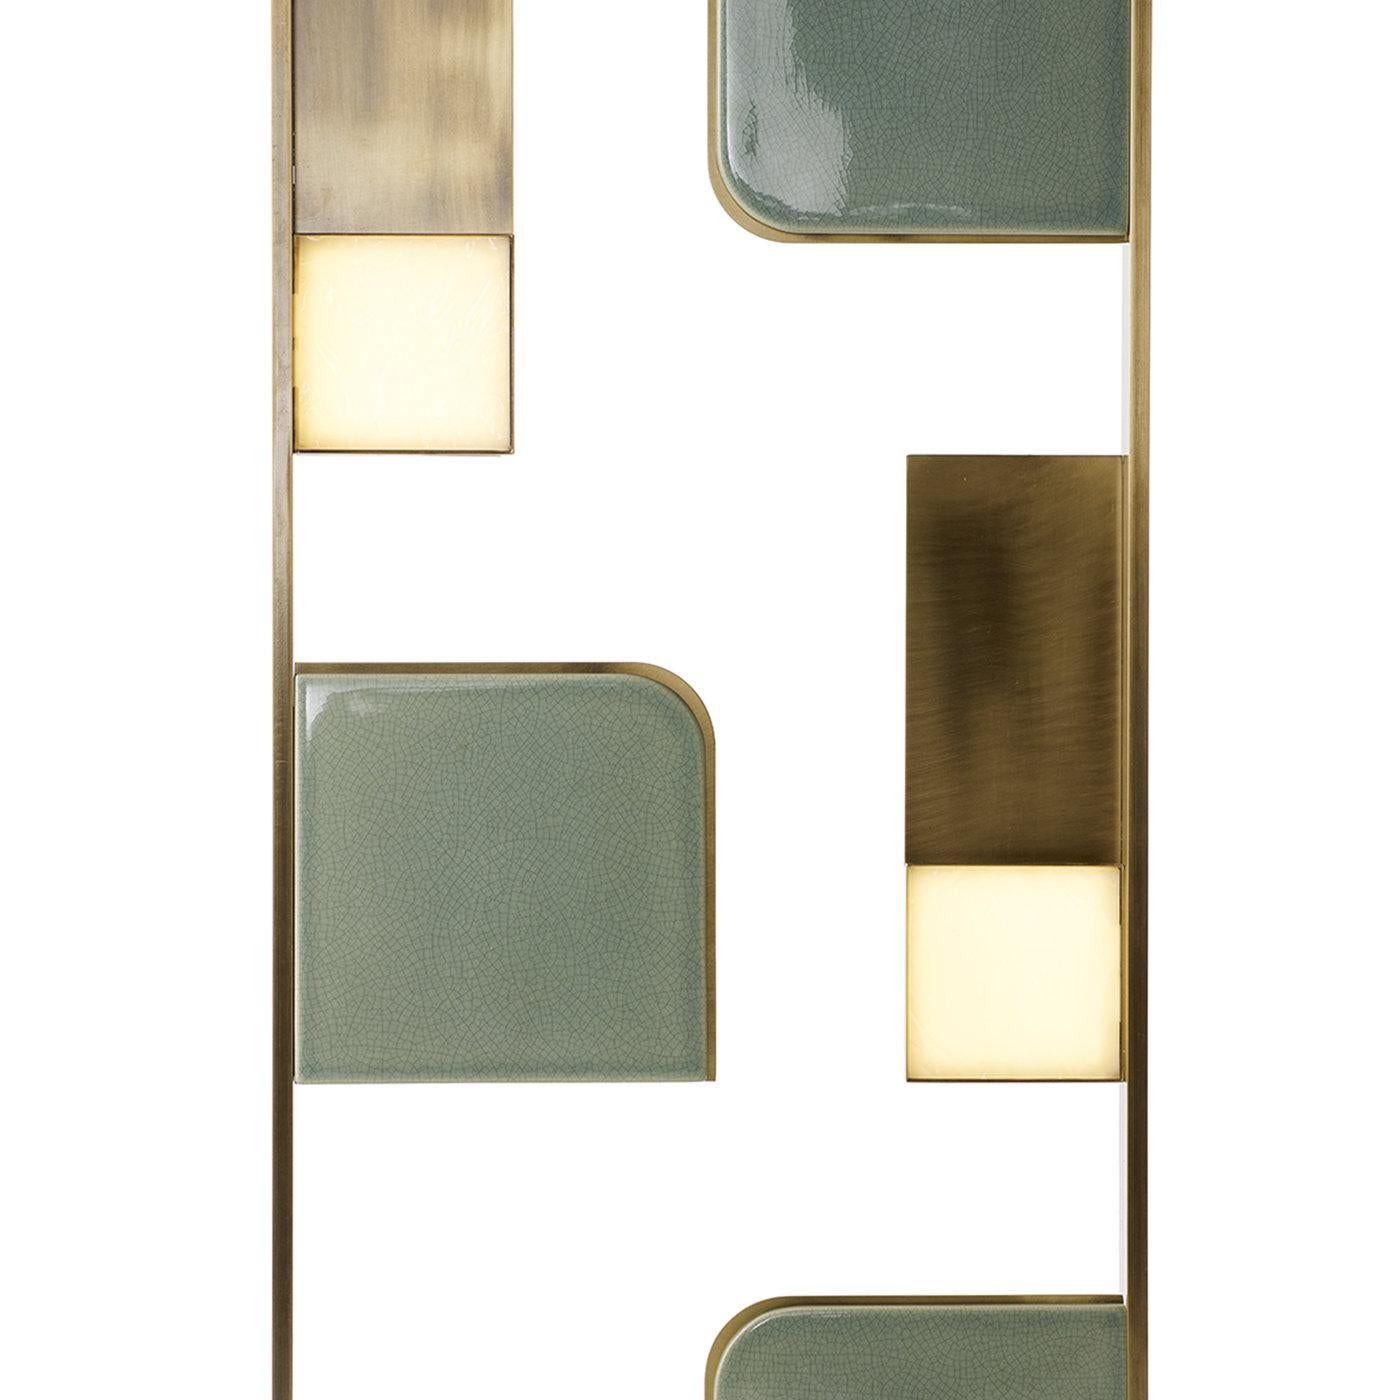 This jewel-like floor lamp is an exercise in elegant craftsmanship and modern design. Introduced at Milan Design Week 2018, its structure is entirely made of brass with a brushed finish and comprises a base supporting a rectangular silhouette that